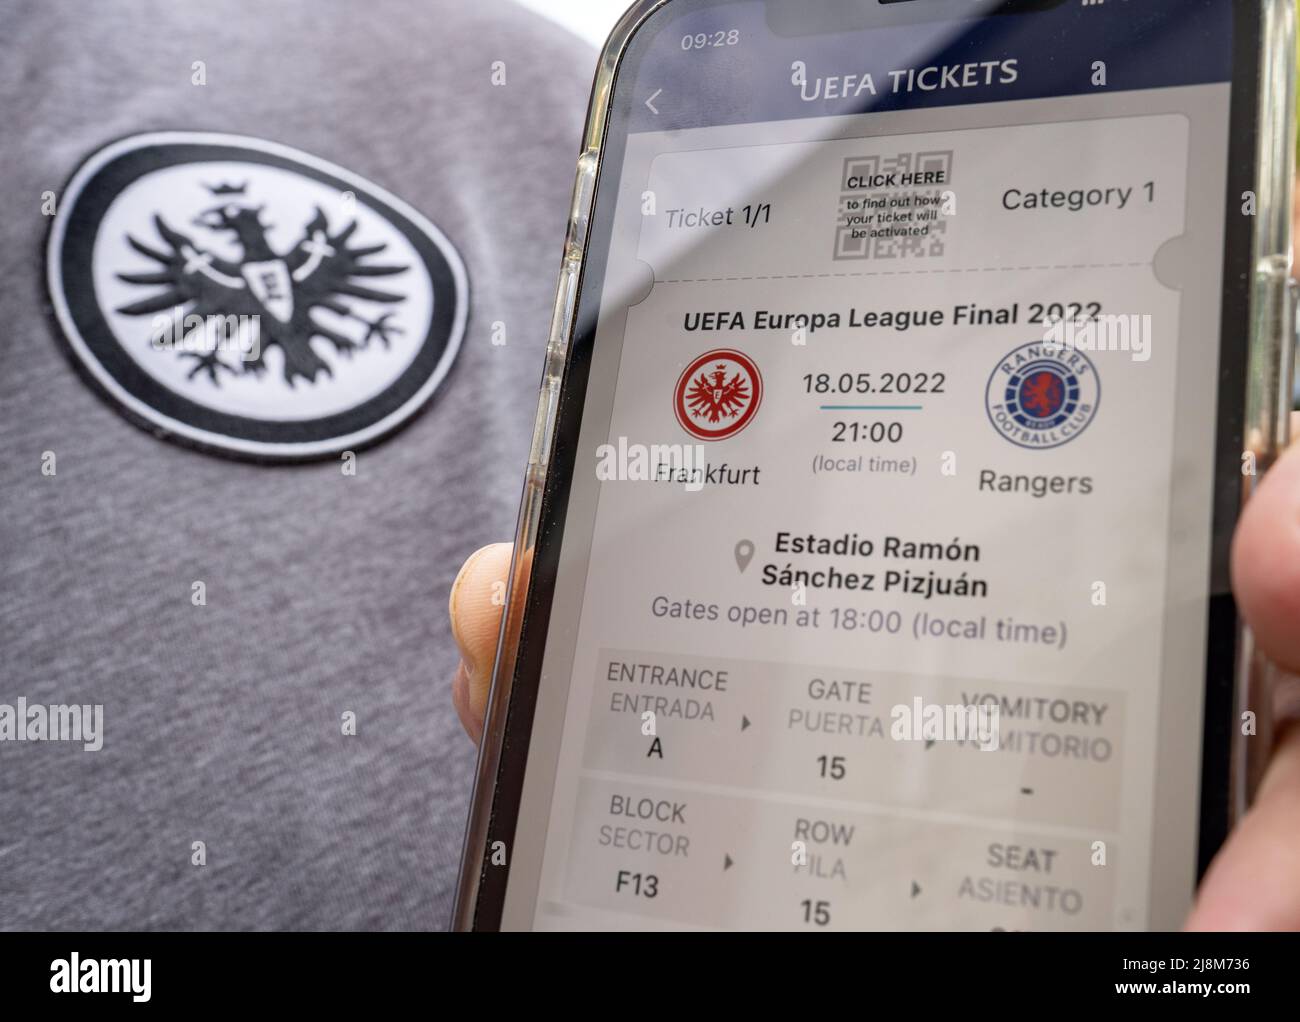 17 May 2022, Hessen, Frankfurt/Main: A fan of Bundesliga soccer club  Eintracht Frankfurt got one of the coveted tickets for the Europa League  final in Seville (May 18, 2022) between Glasgow Rangers